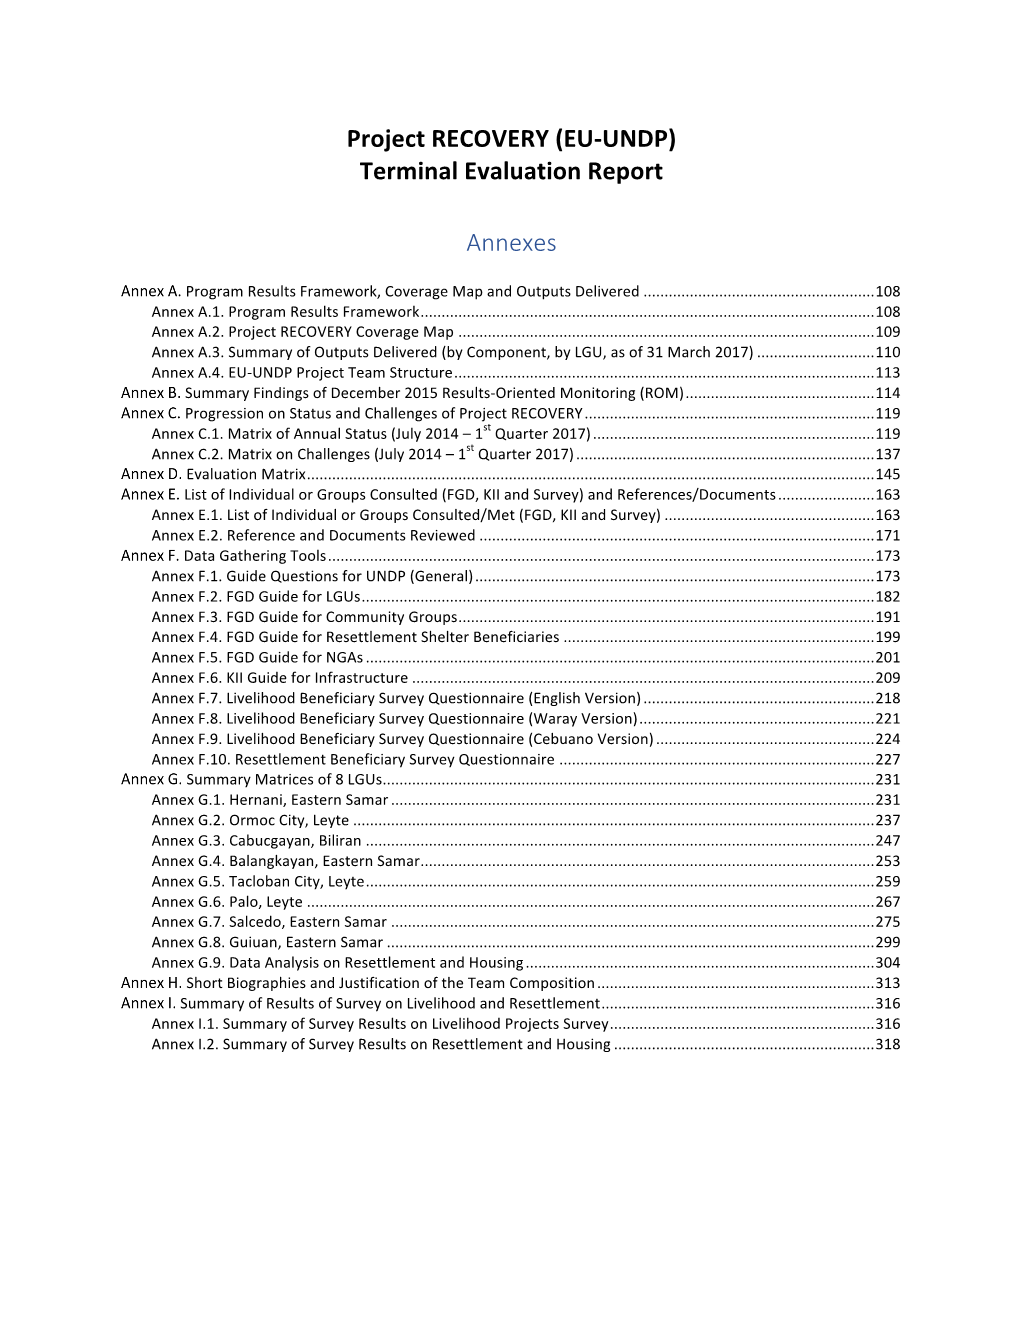 Project RECOVERY (EU-UNDP) Terminal Evaluation Report Annexes